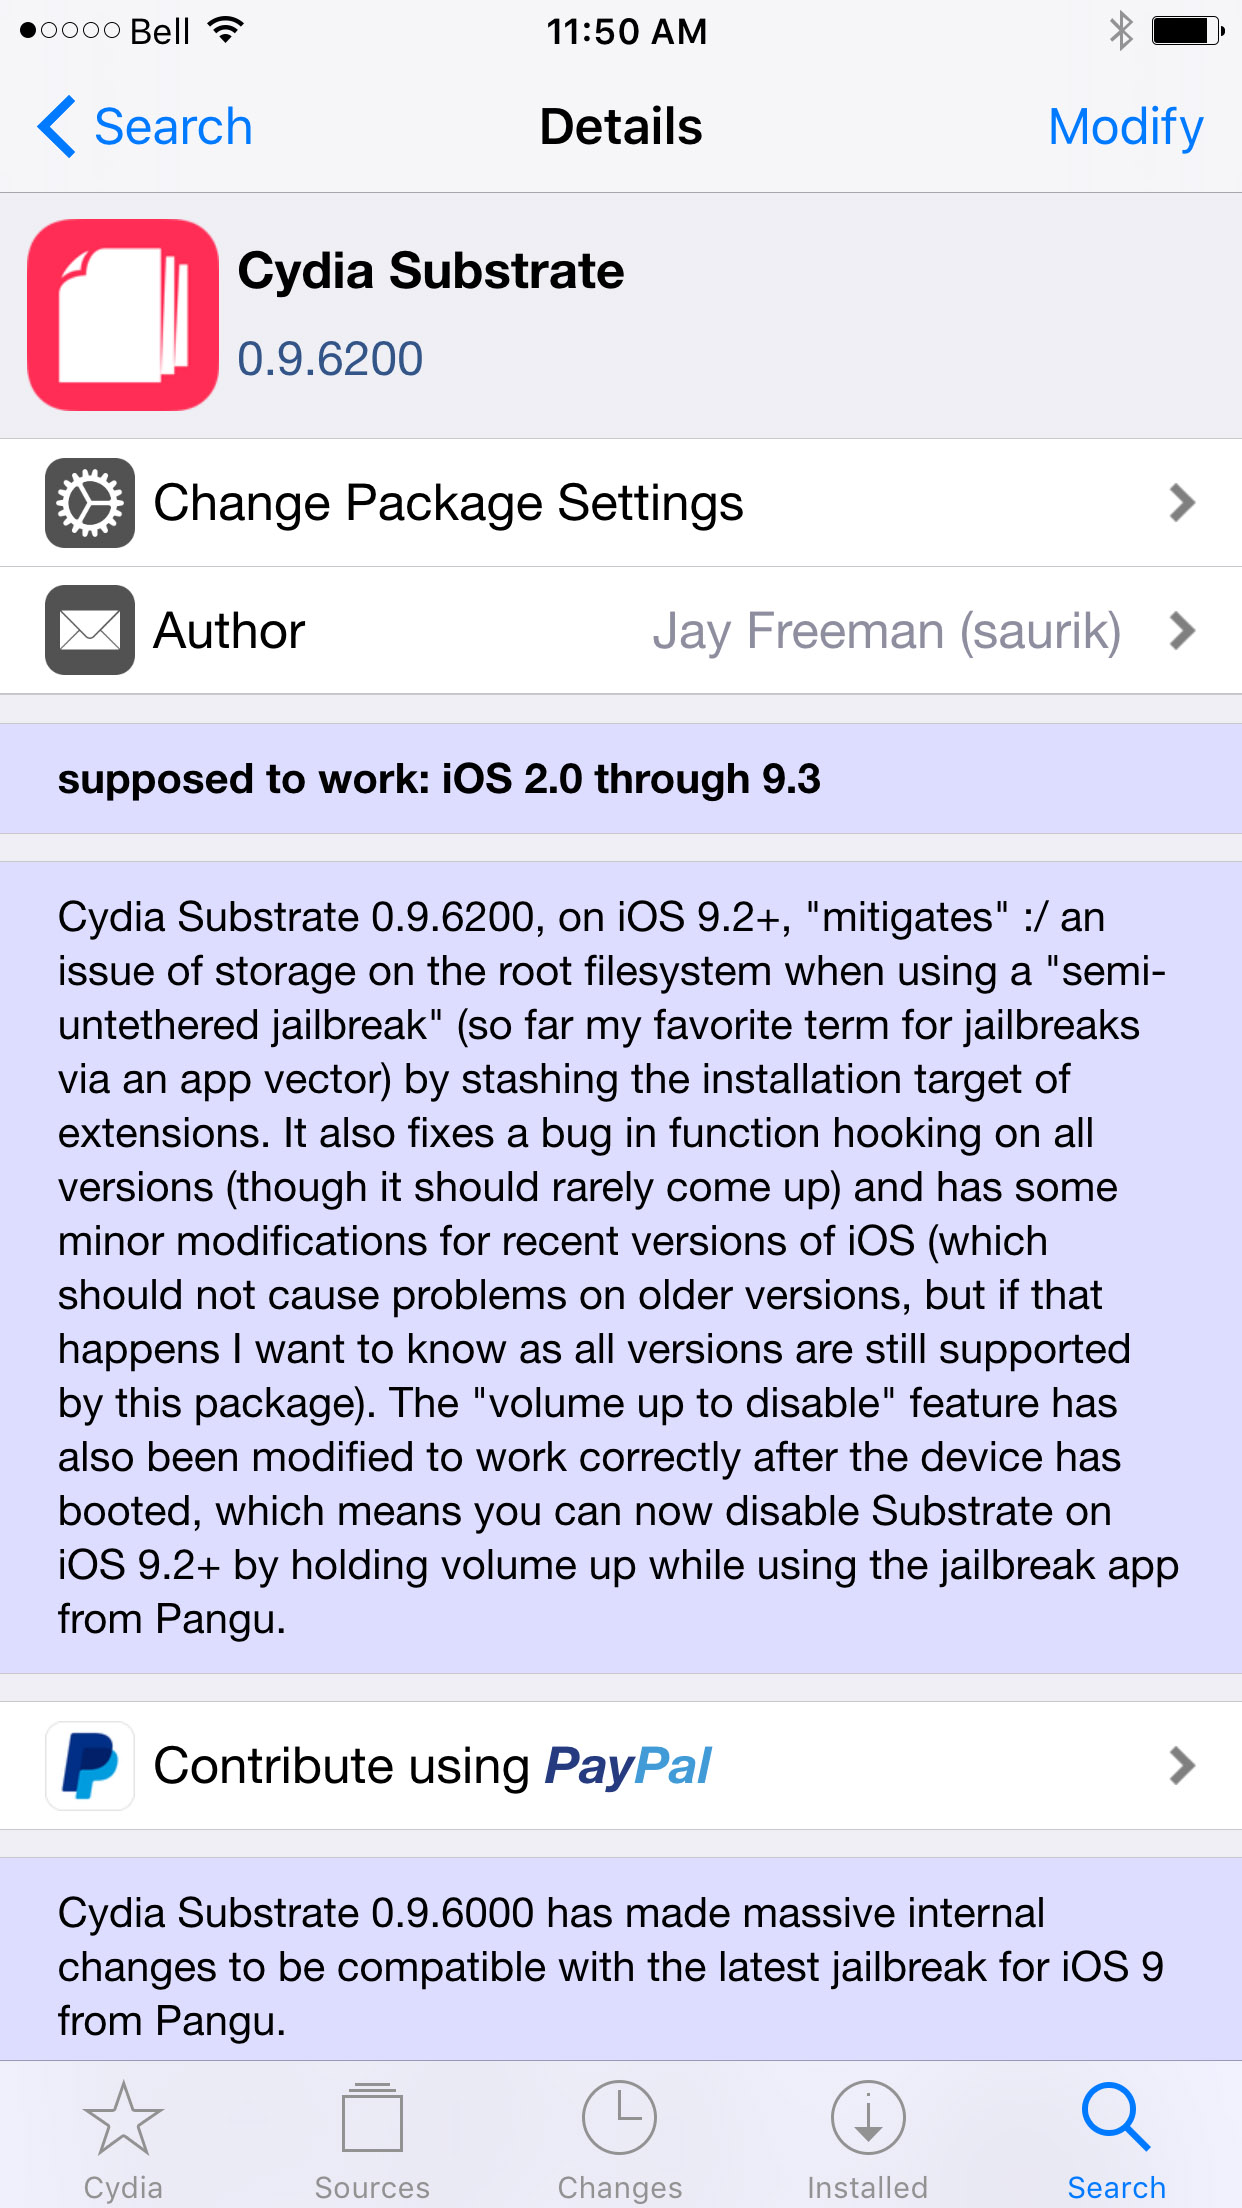 Cydia Substrate Updated With Improved Compatibility For Pangu Jailbreak Of Ios 9 2 9 3 3 Iclarified